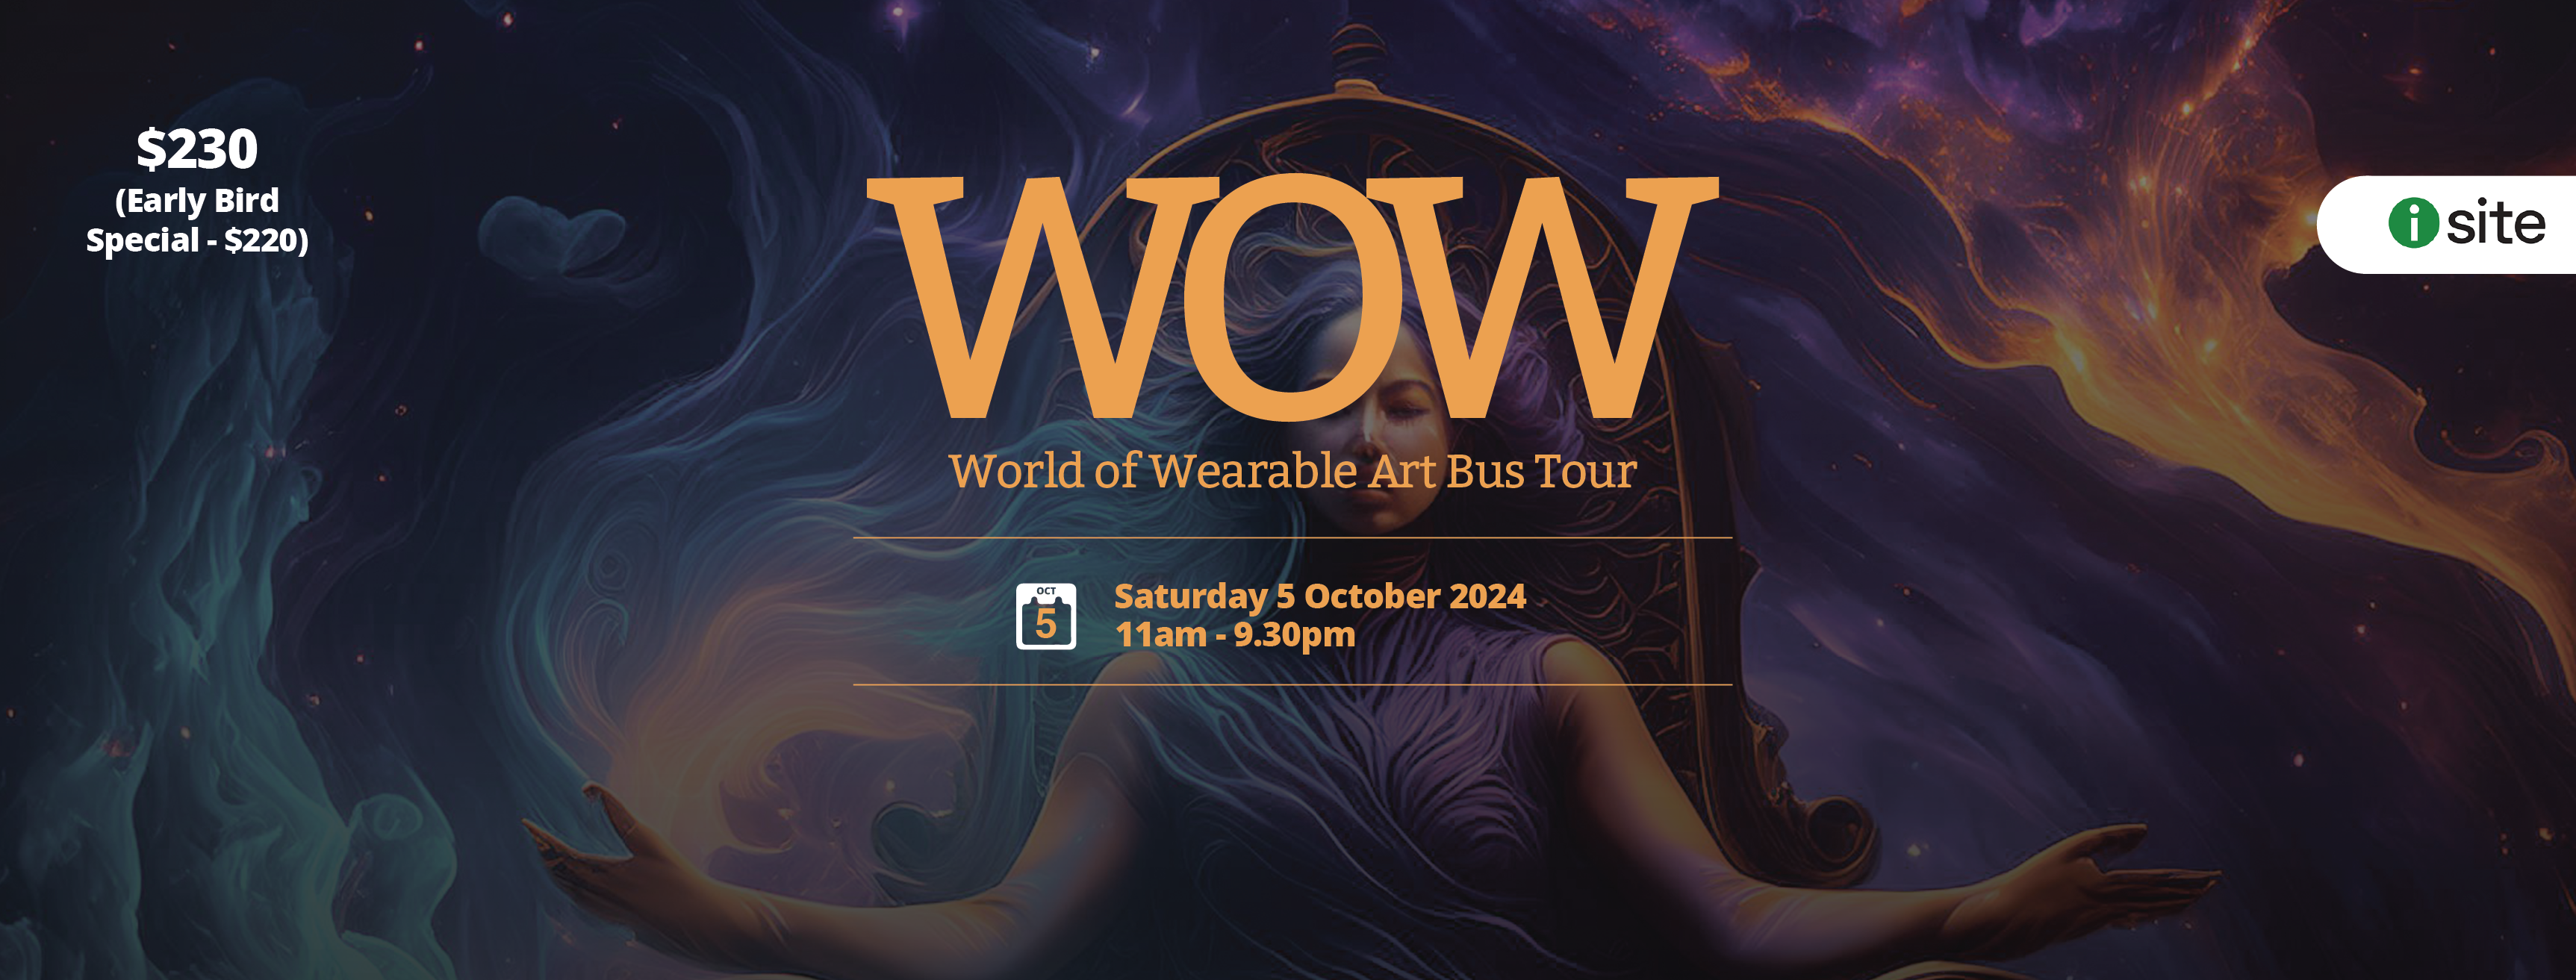 World of Wearable art bus tour, Saturday 5 October 20224.